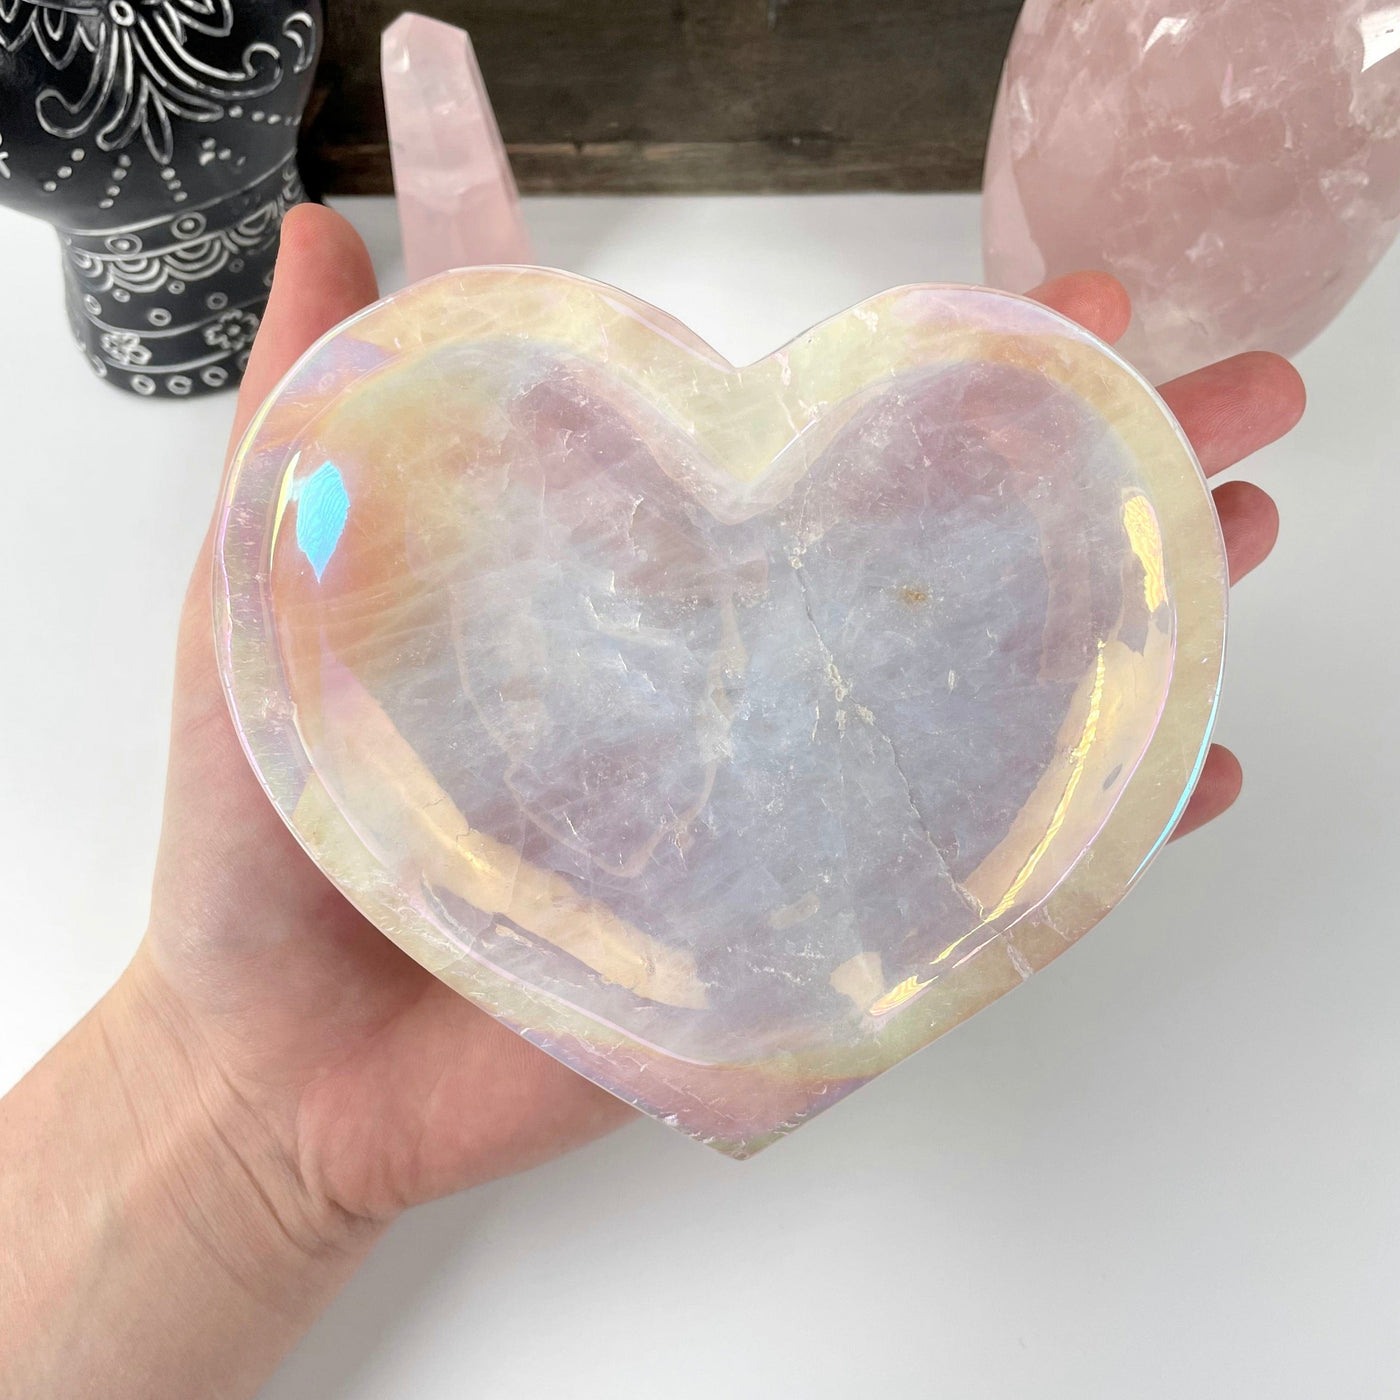 angel aura rose quartz heart bowl in hand for size reference